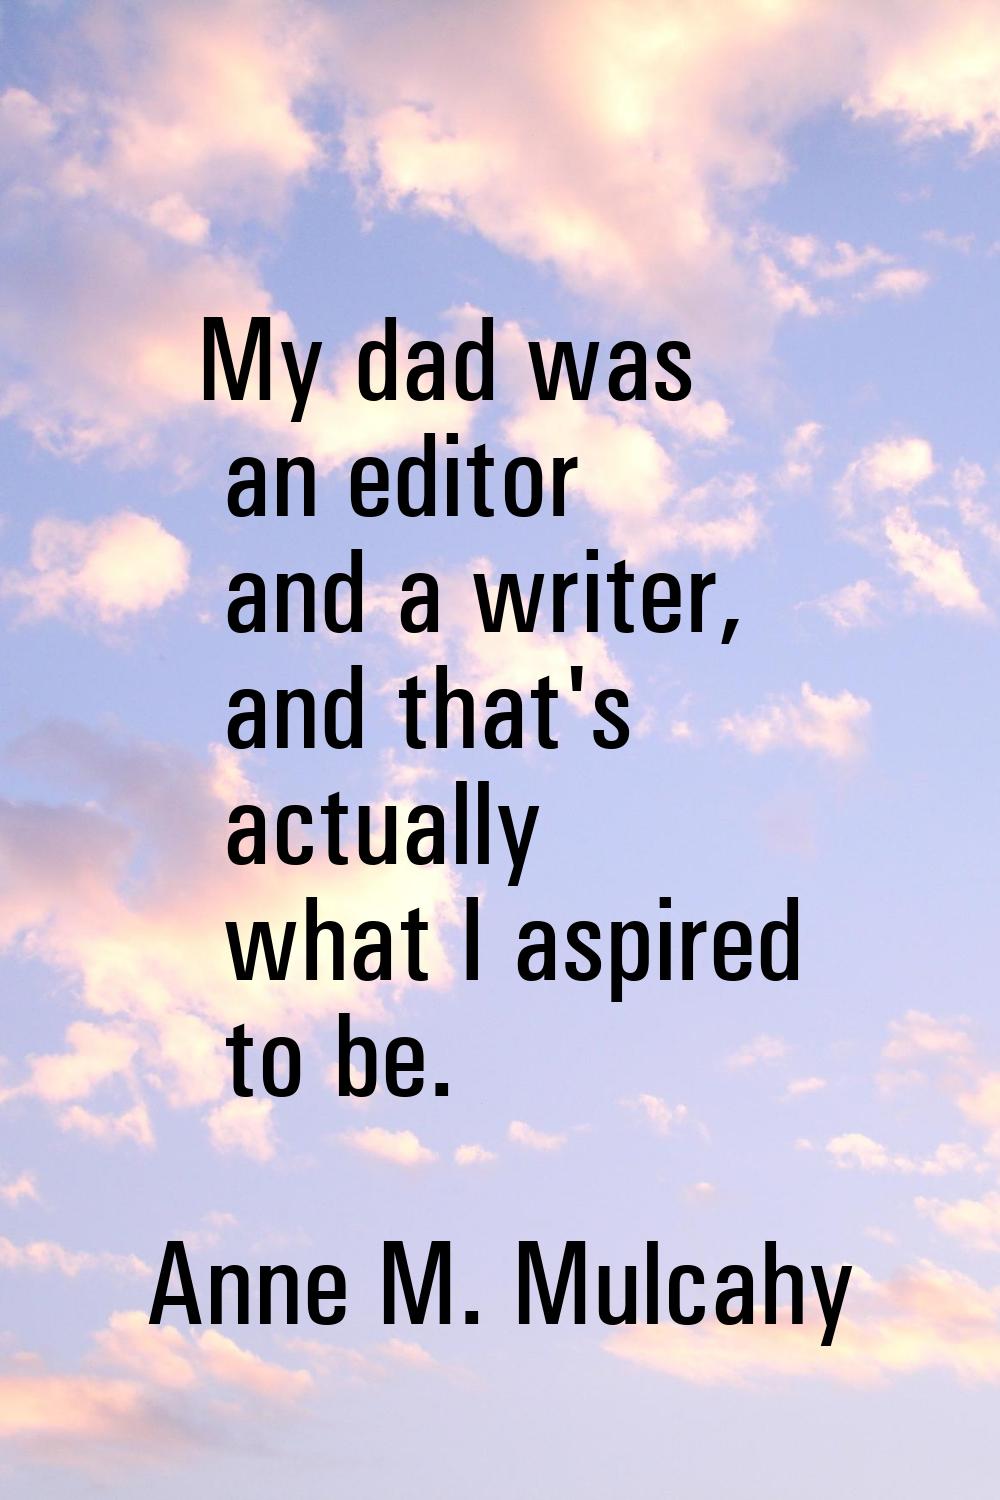 My dad was an editor and a writer, and that's actually what I aspired to be.